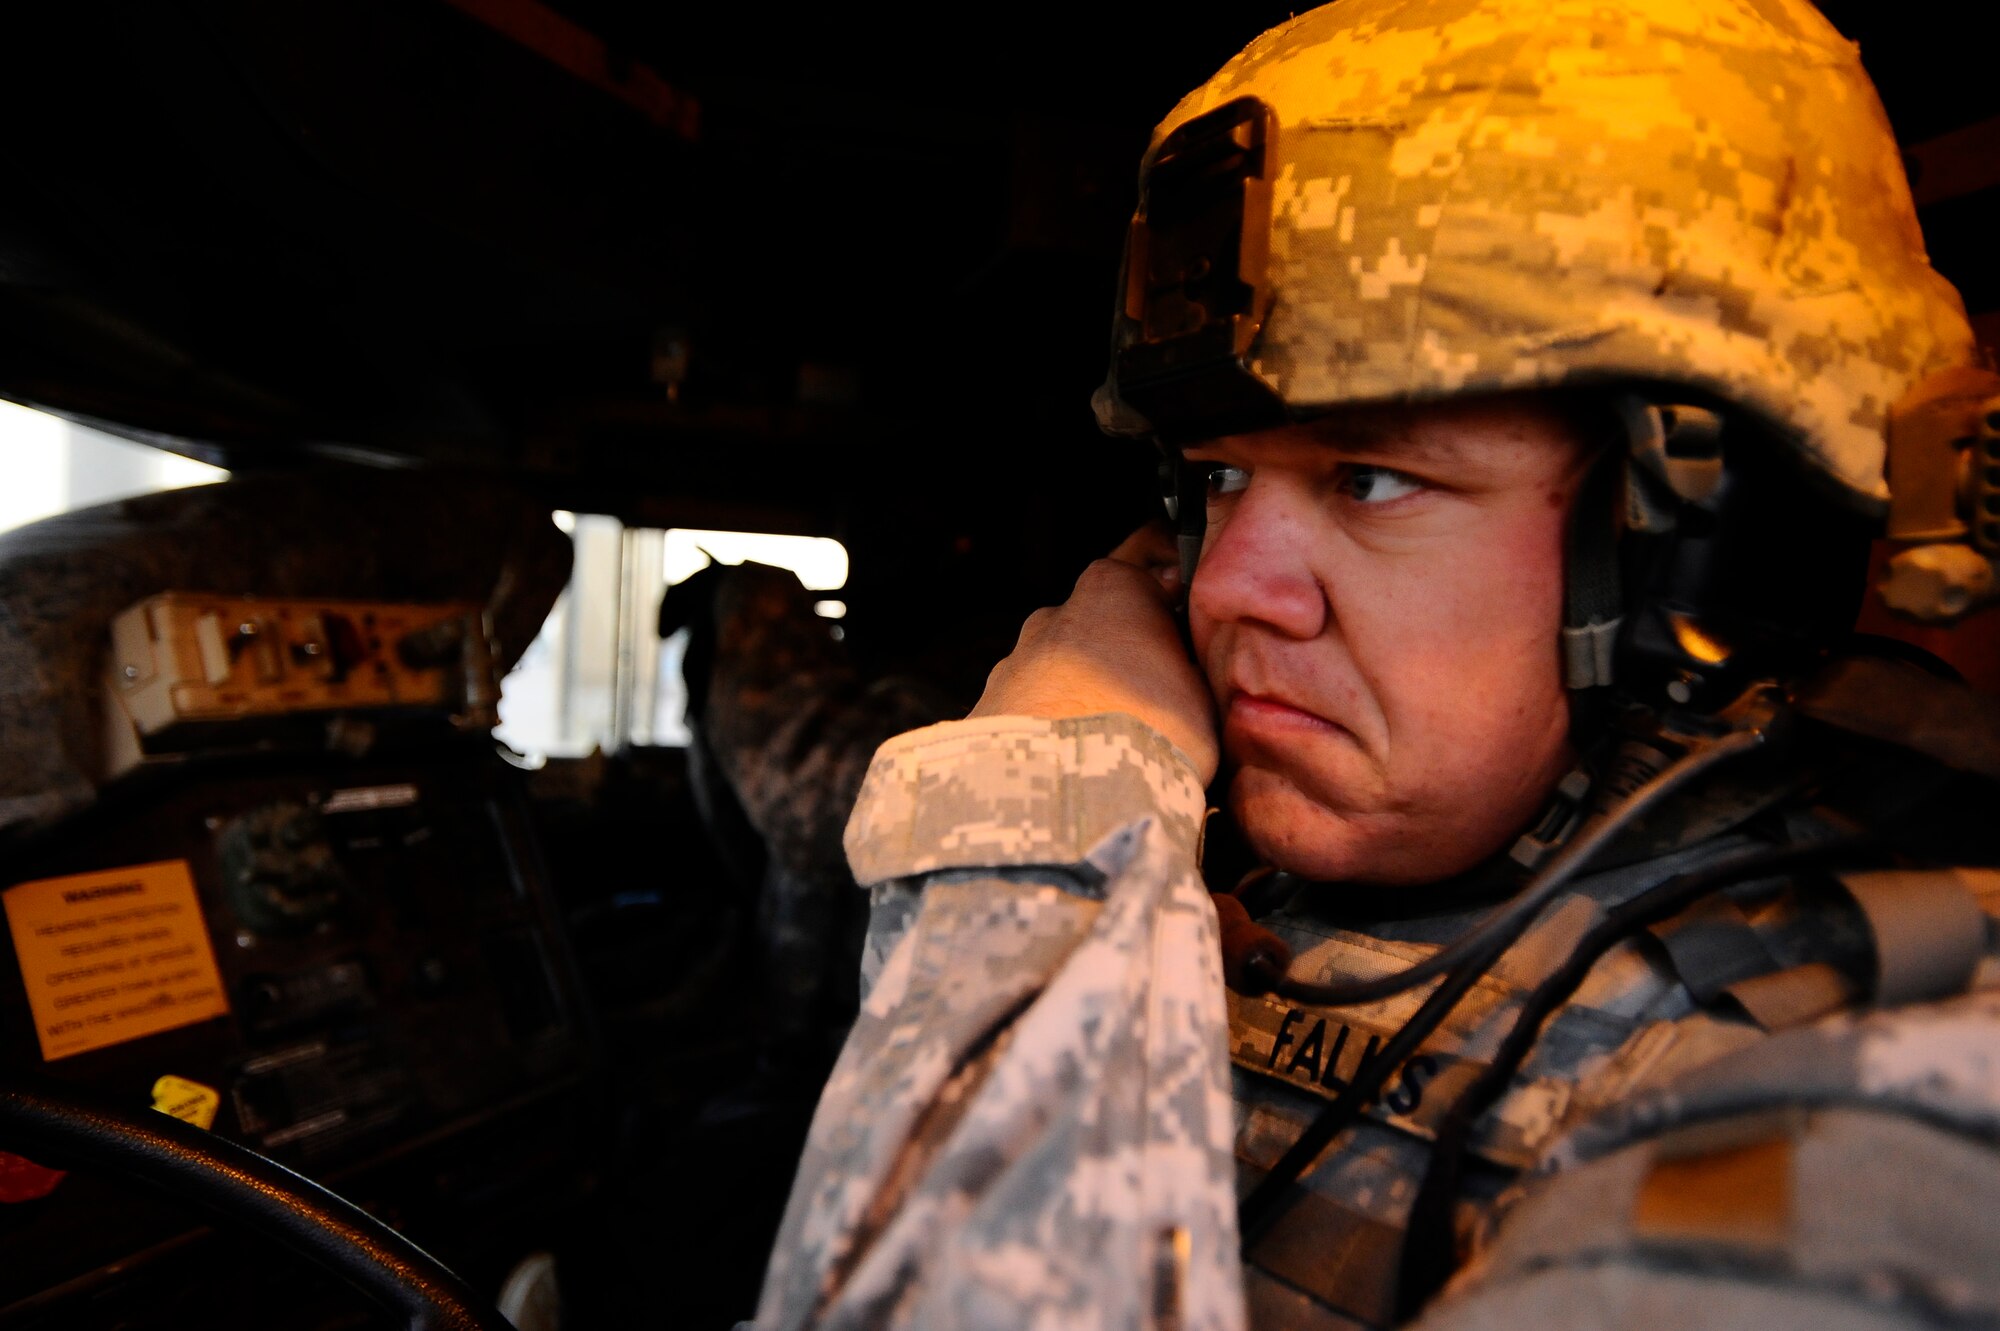 Staff Sgt. Jonathan Falks dons his helmet inside an armored truck at Joint Base Balad, Iraq, Dec. 11. Falks and other Airmen with the 732nd Expeditionary Civil Engineer Squadron Detachment 6 undertake outside-the-wire construction projects for the Army. Falks, a 732nd ECES Det. 6 heavy equipment operator and native of Gonzales, Texas, is deployed from Hickam Air Force Base, Hawaii. (U.S. Air Force photo/Airman 1st Class Jason Epley)